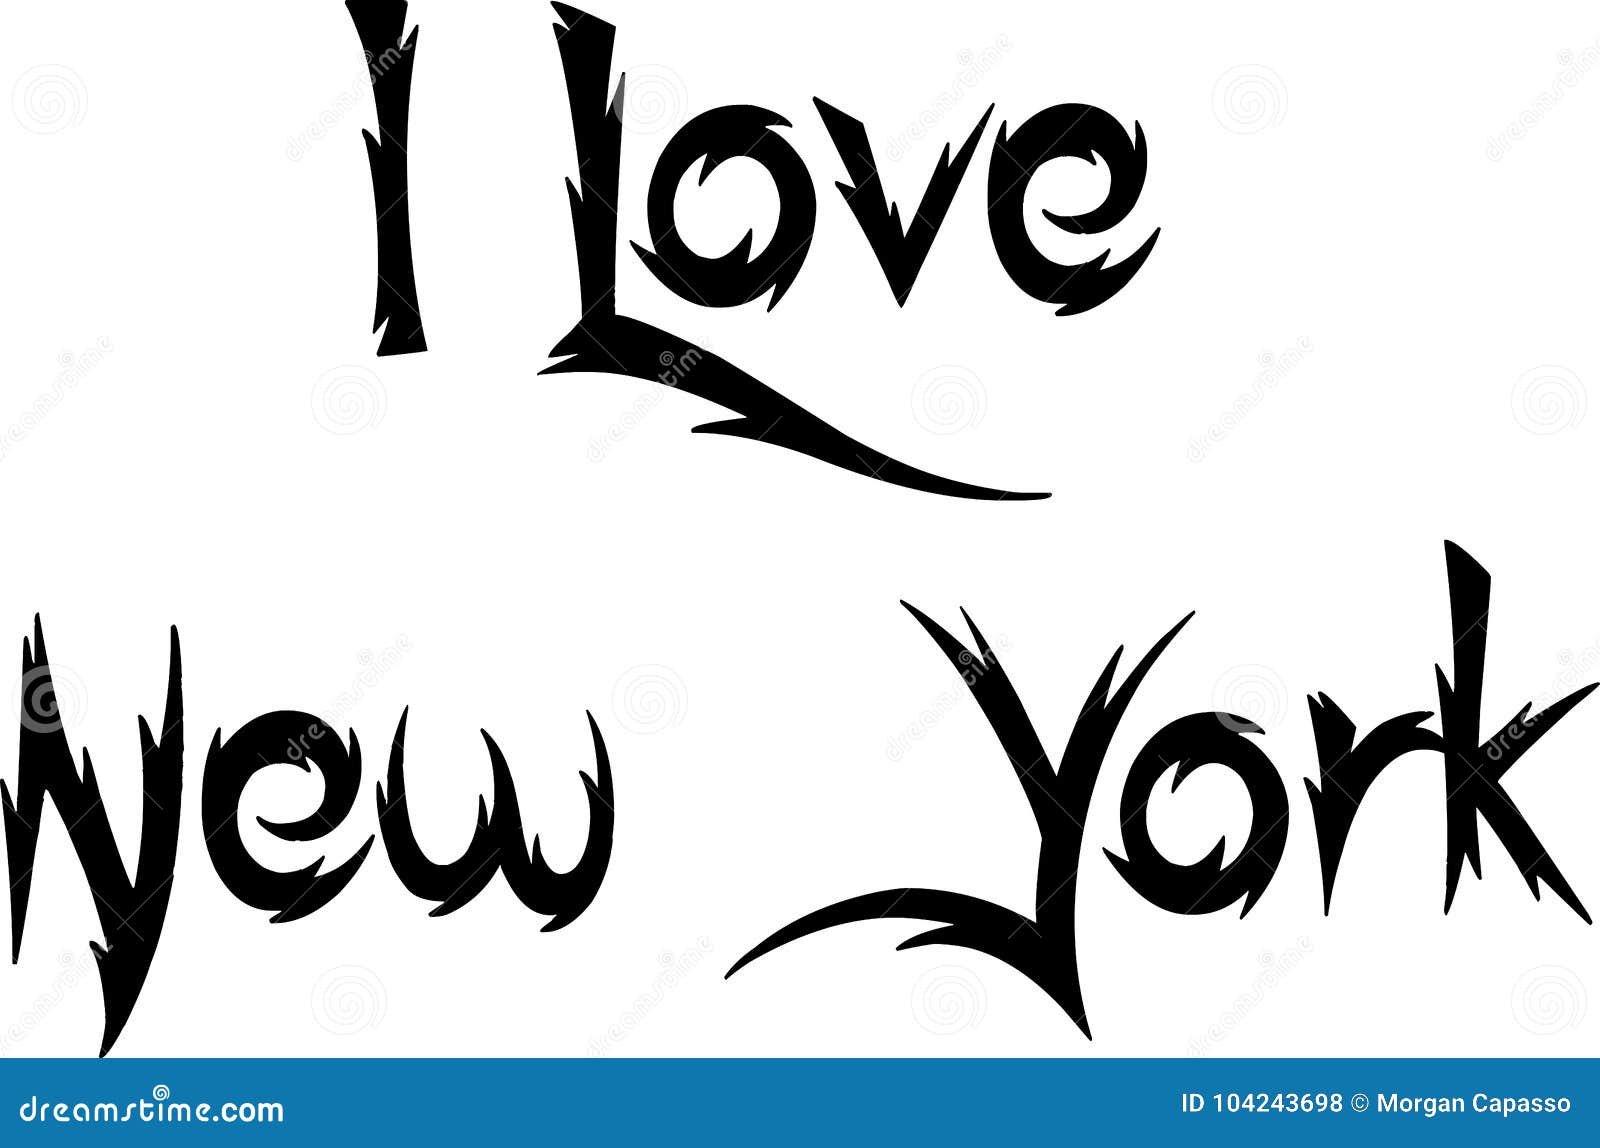 Download I Love New York text sign. stock vector. Illustration of path - 104243698